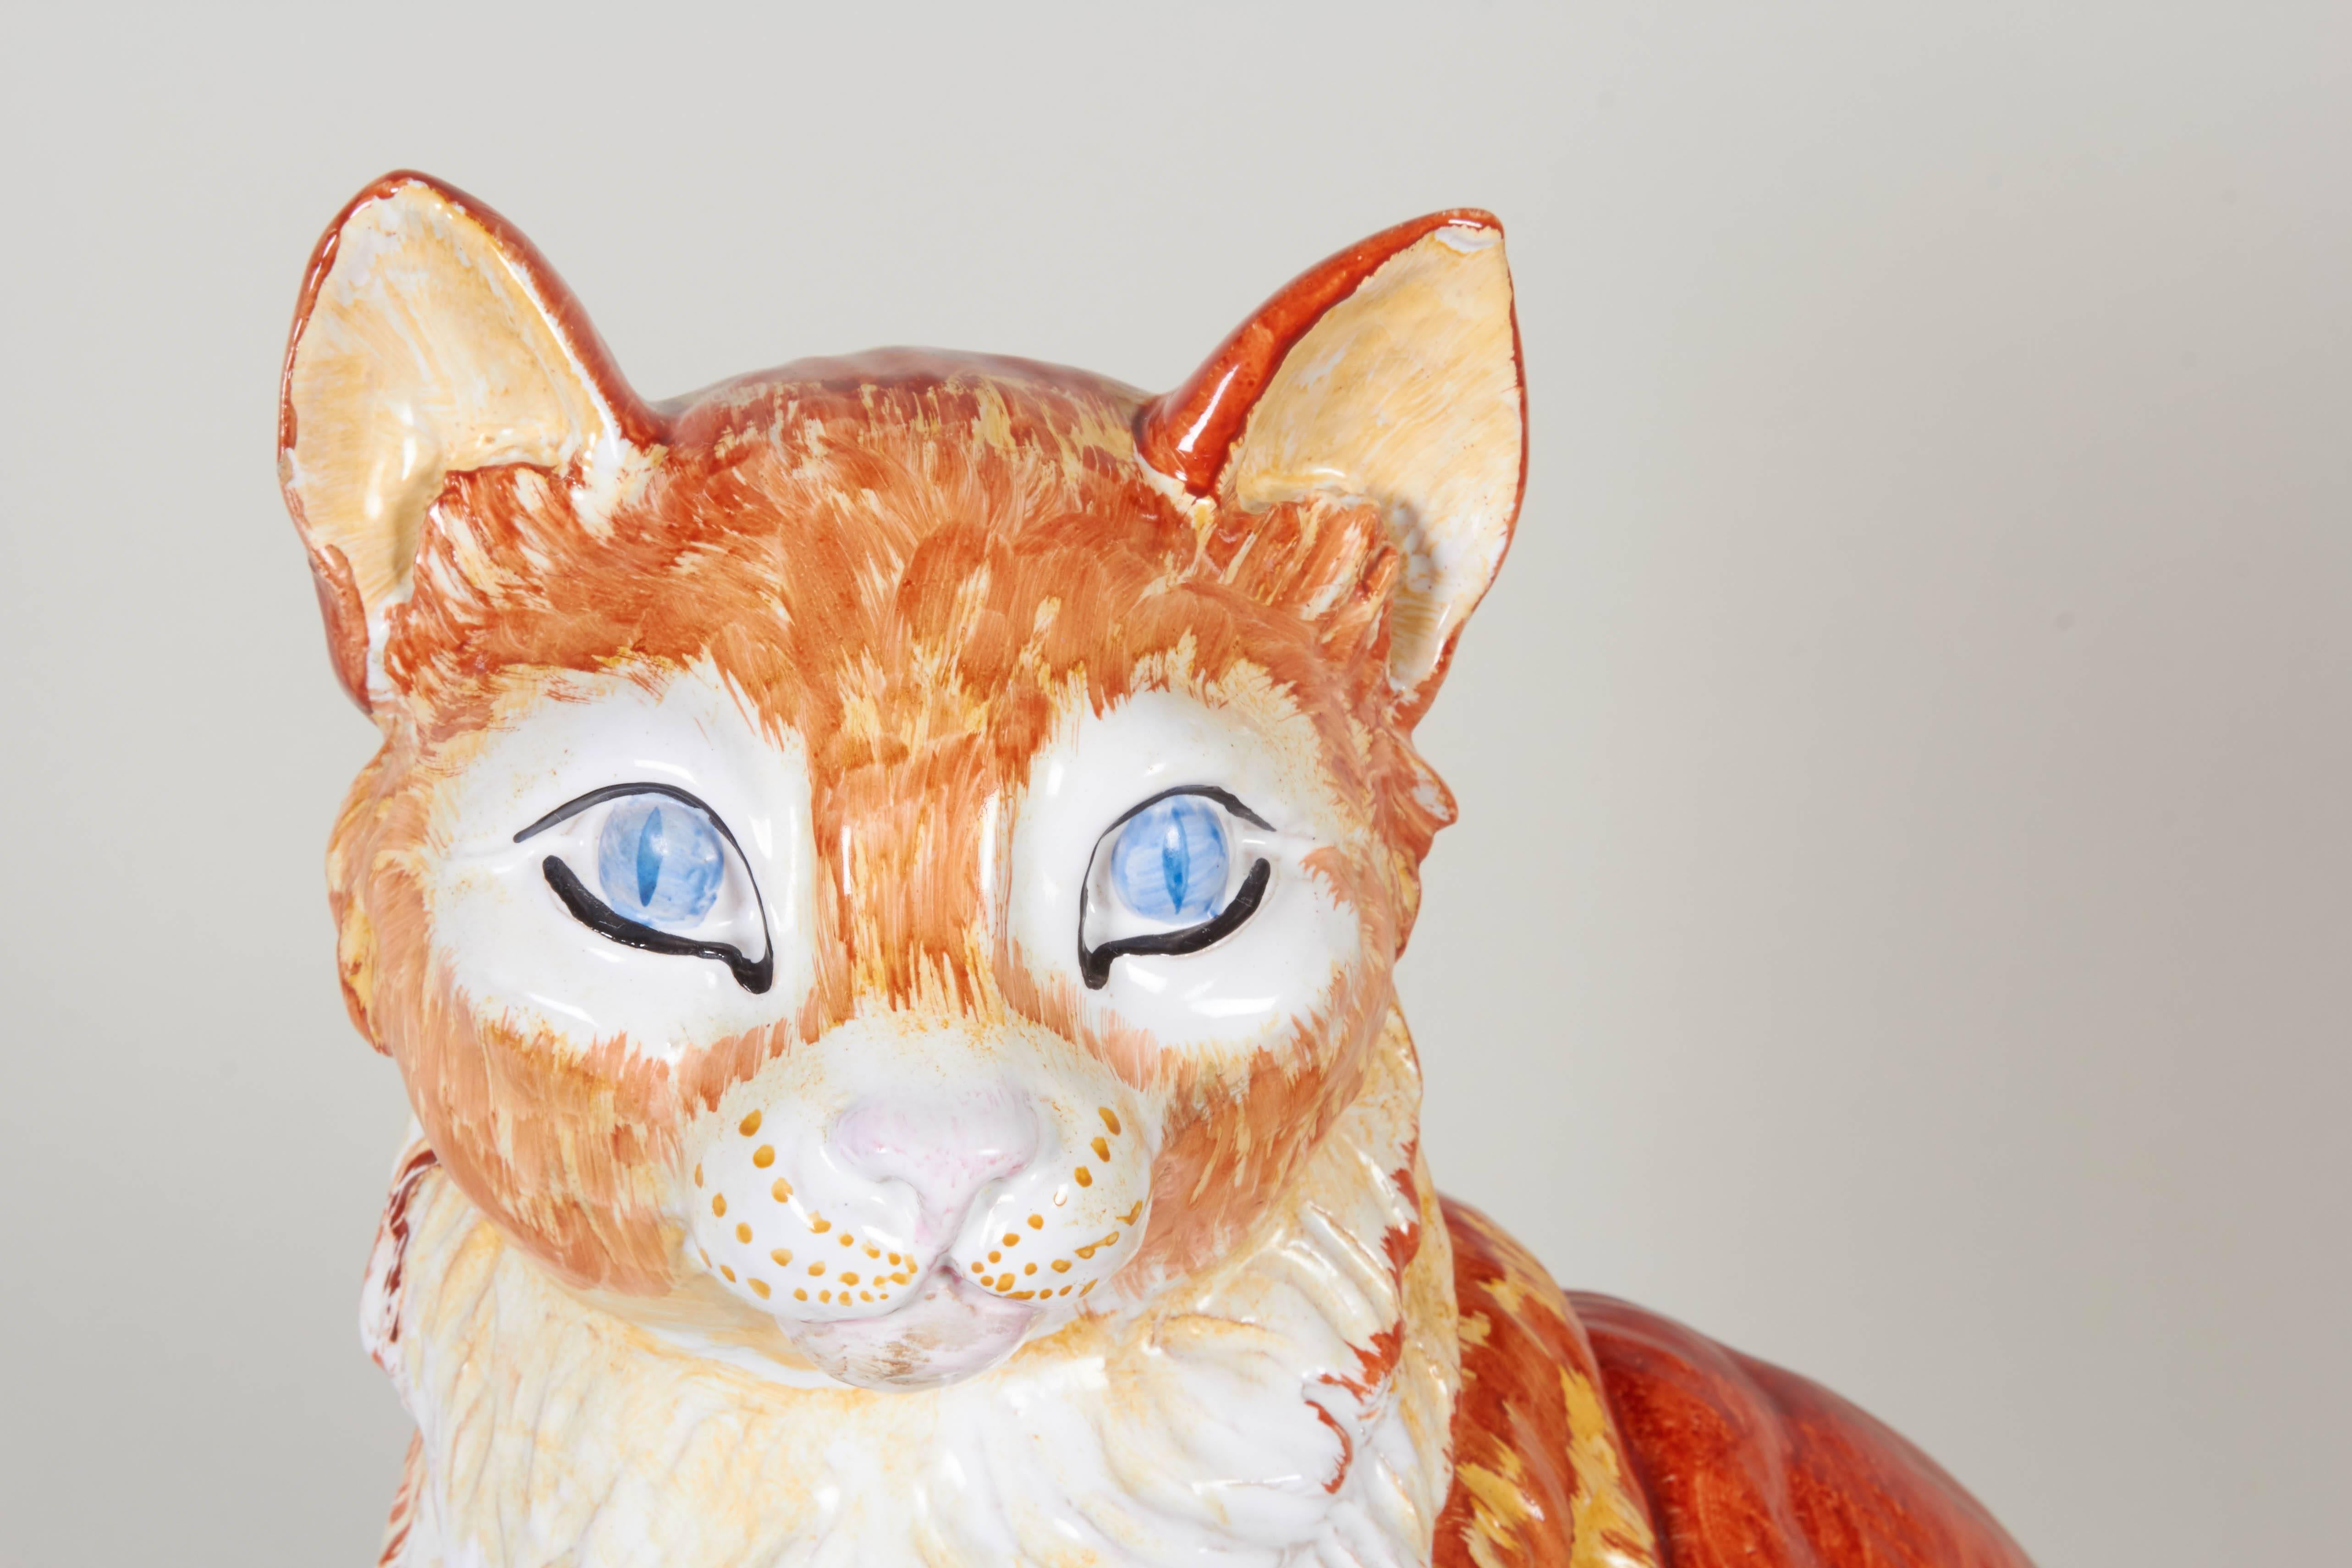 A hand-painted and glazed ceramic sculpture depicting an orange stripped tabby cat, produced in Italy, circa 1970s for Meiselman Imports. Markings include serial #K345 and [Made in Italy for Meiselman Imports] written to the bottom, in addition to